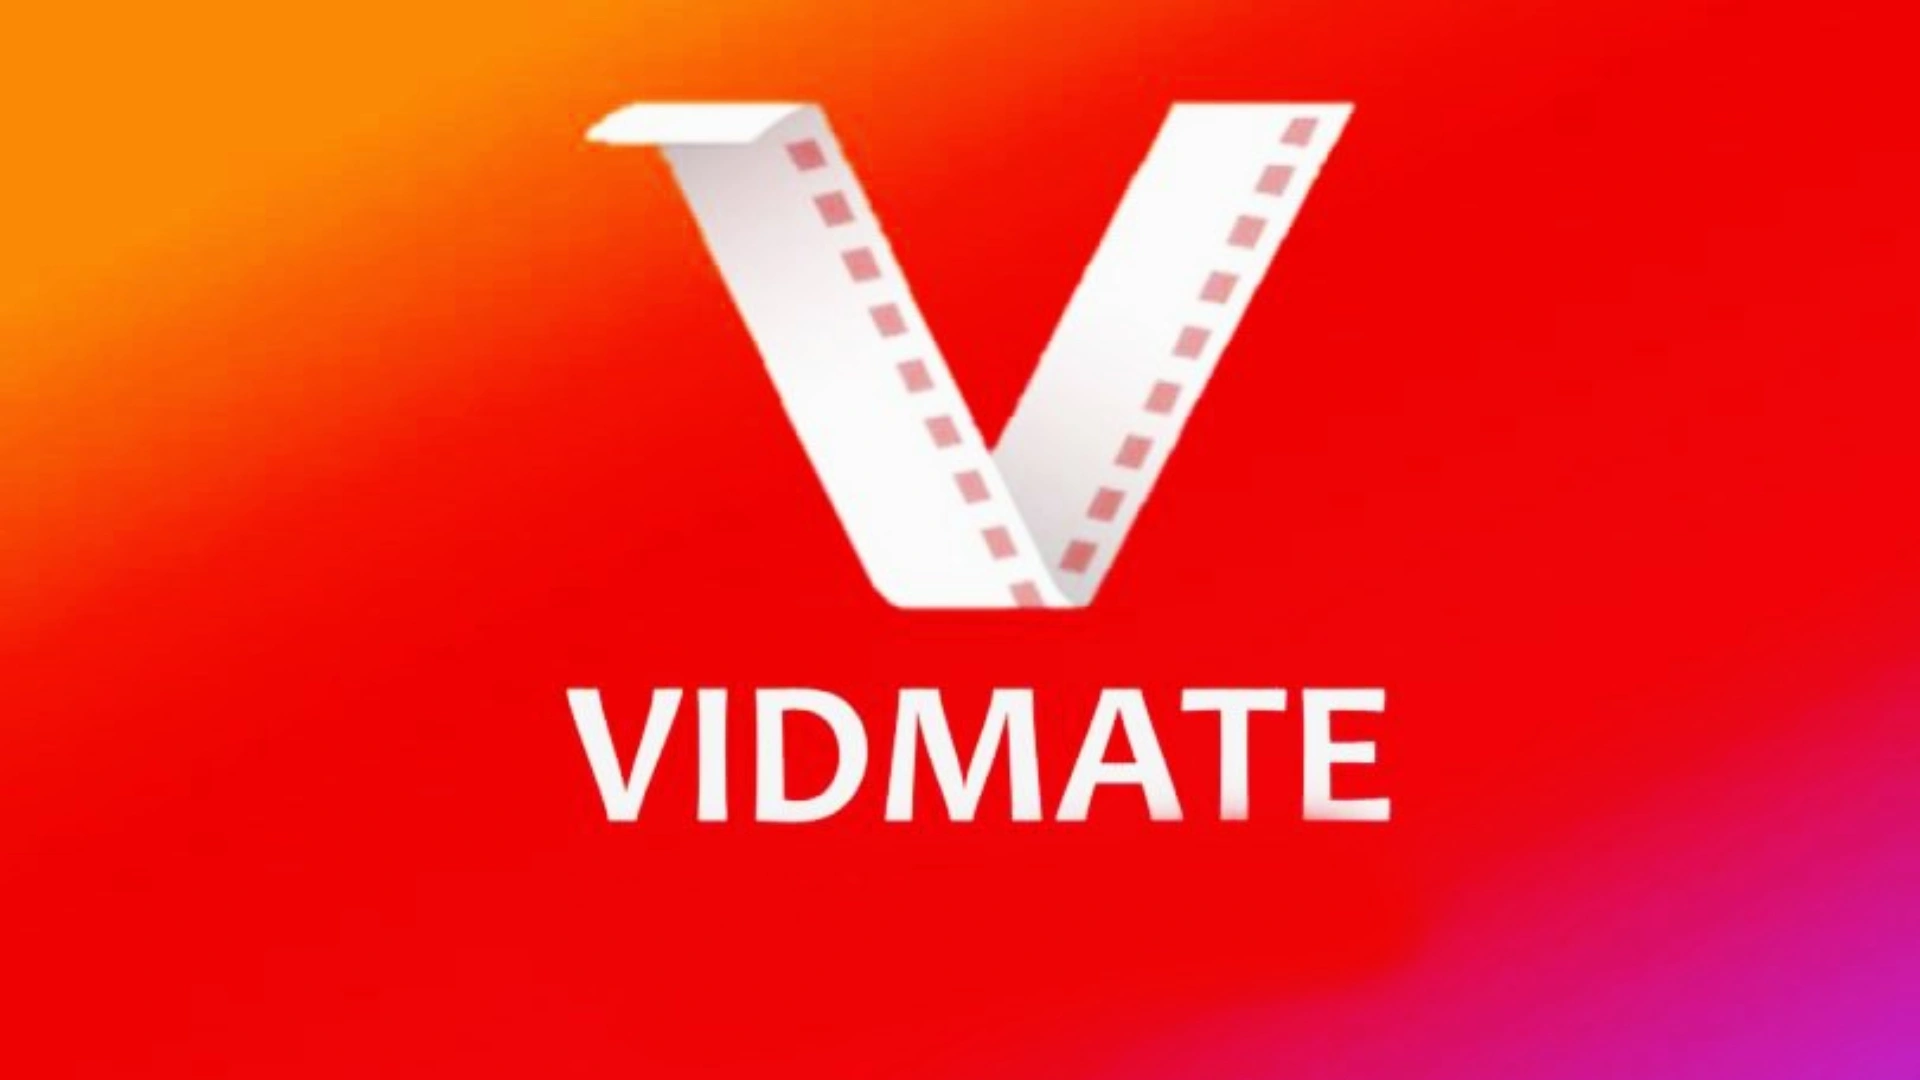 How to Download VidMate Old Versions on Android